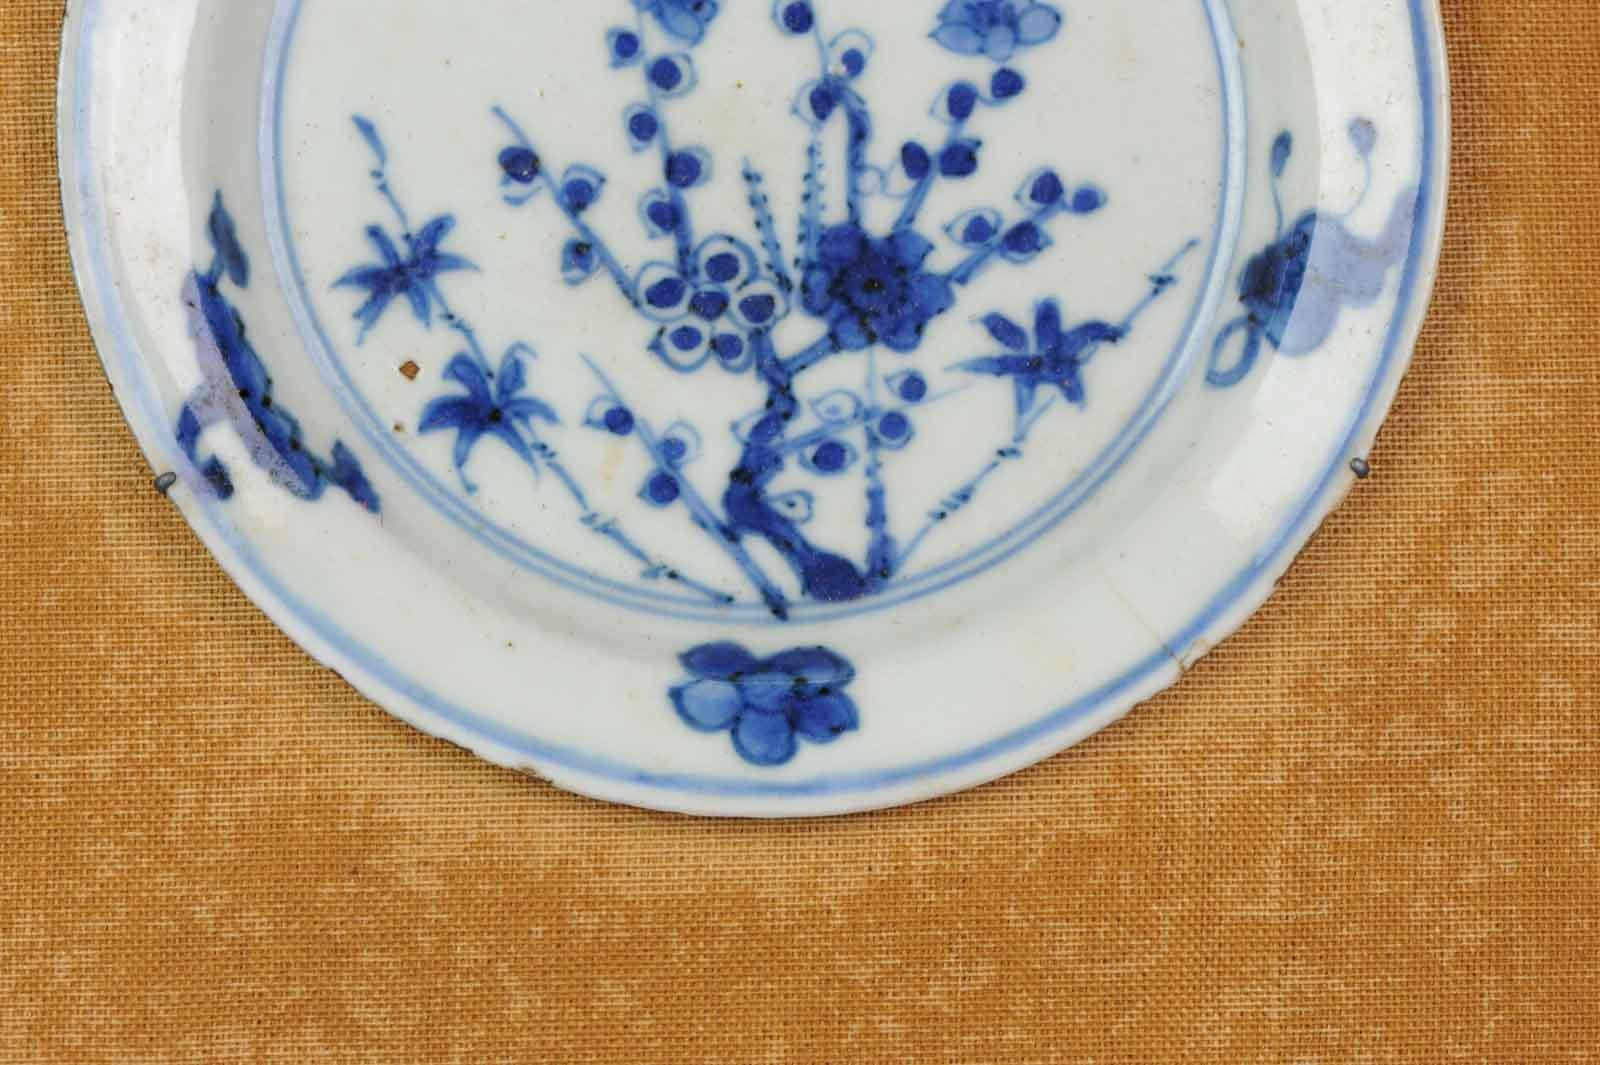 Unusual Framed 17th Century Antique Chinese Porcelain Ming Flowers Plate and Box For Sale 4